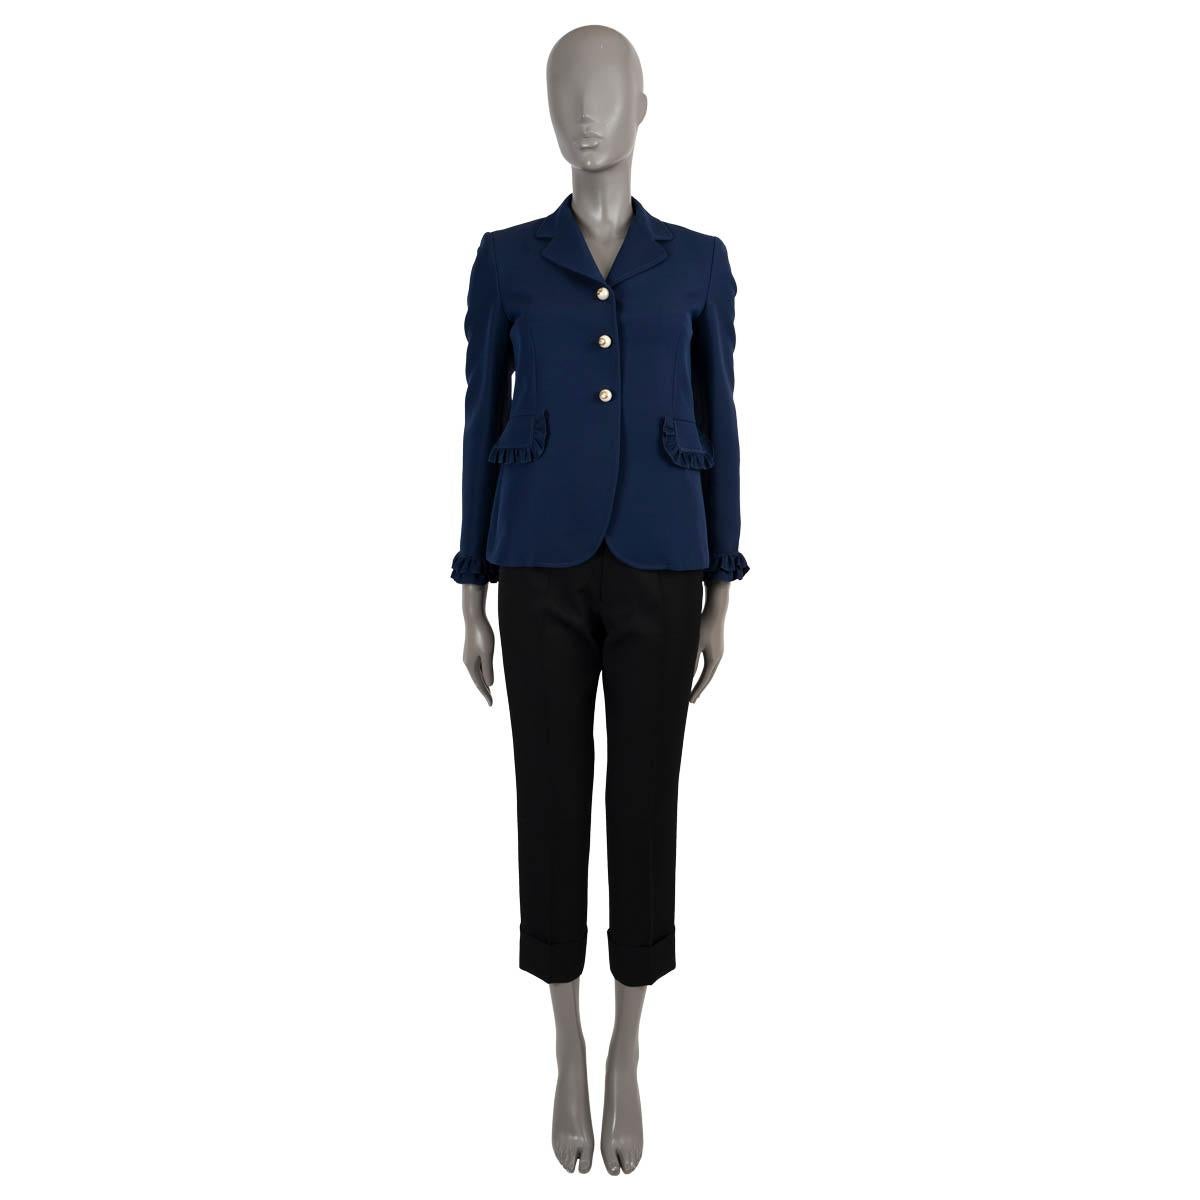 Women's GUCCI navy blue 2016 PEARL BUTTON RUFFLED CREPE Blazer Jacket 38 XS For Sale